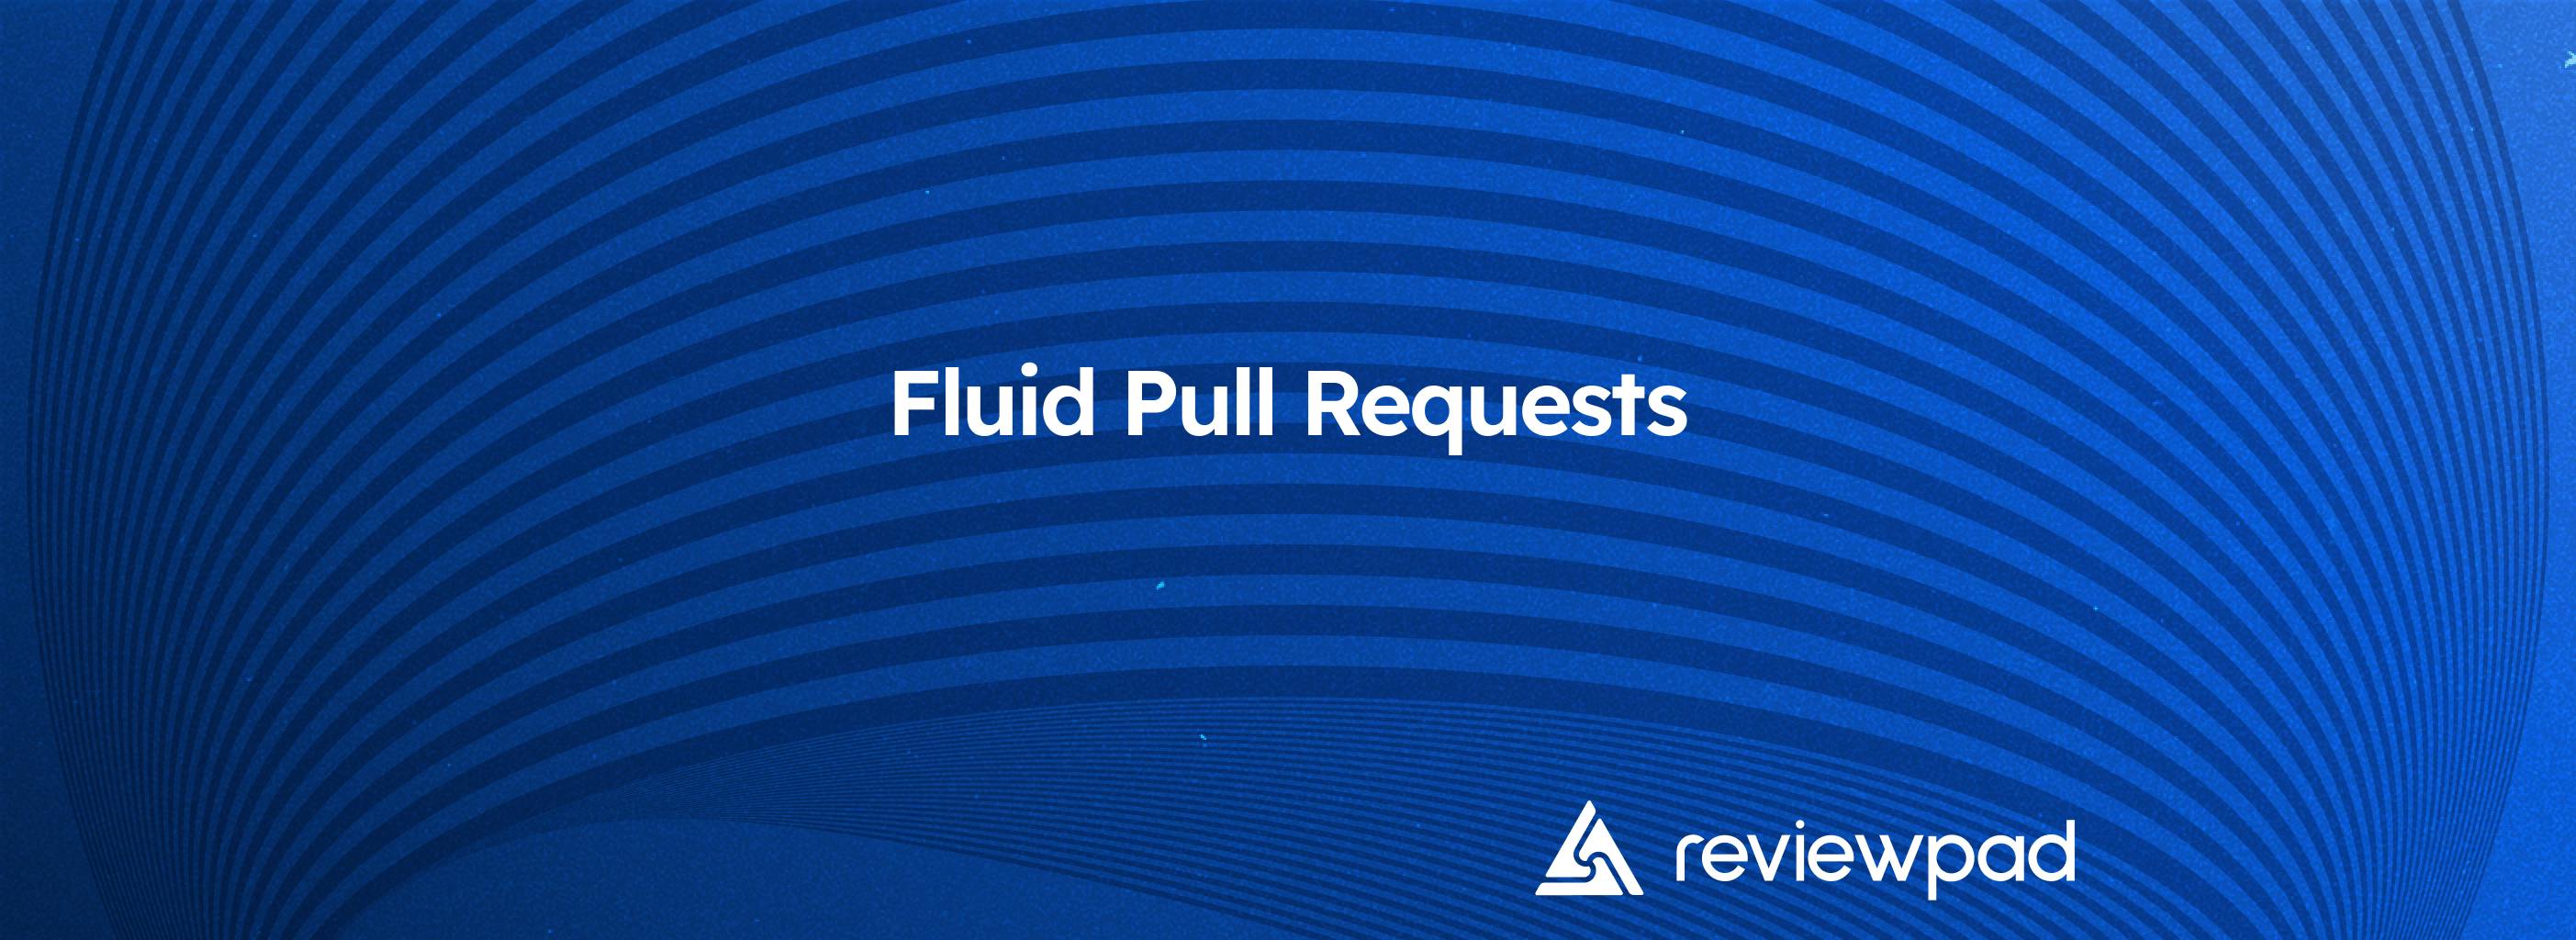 Fluid Pull Requests